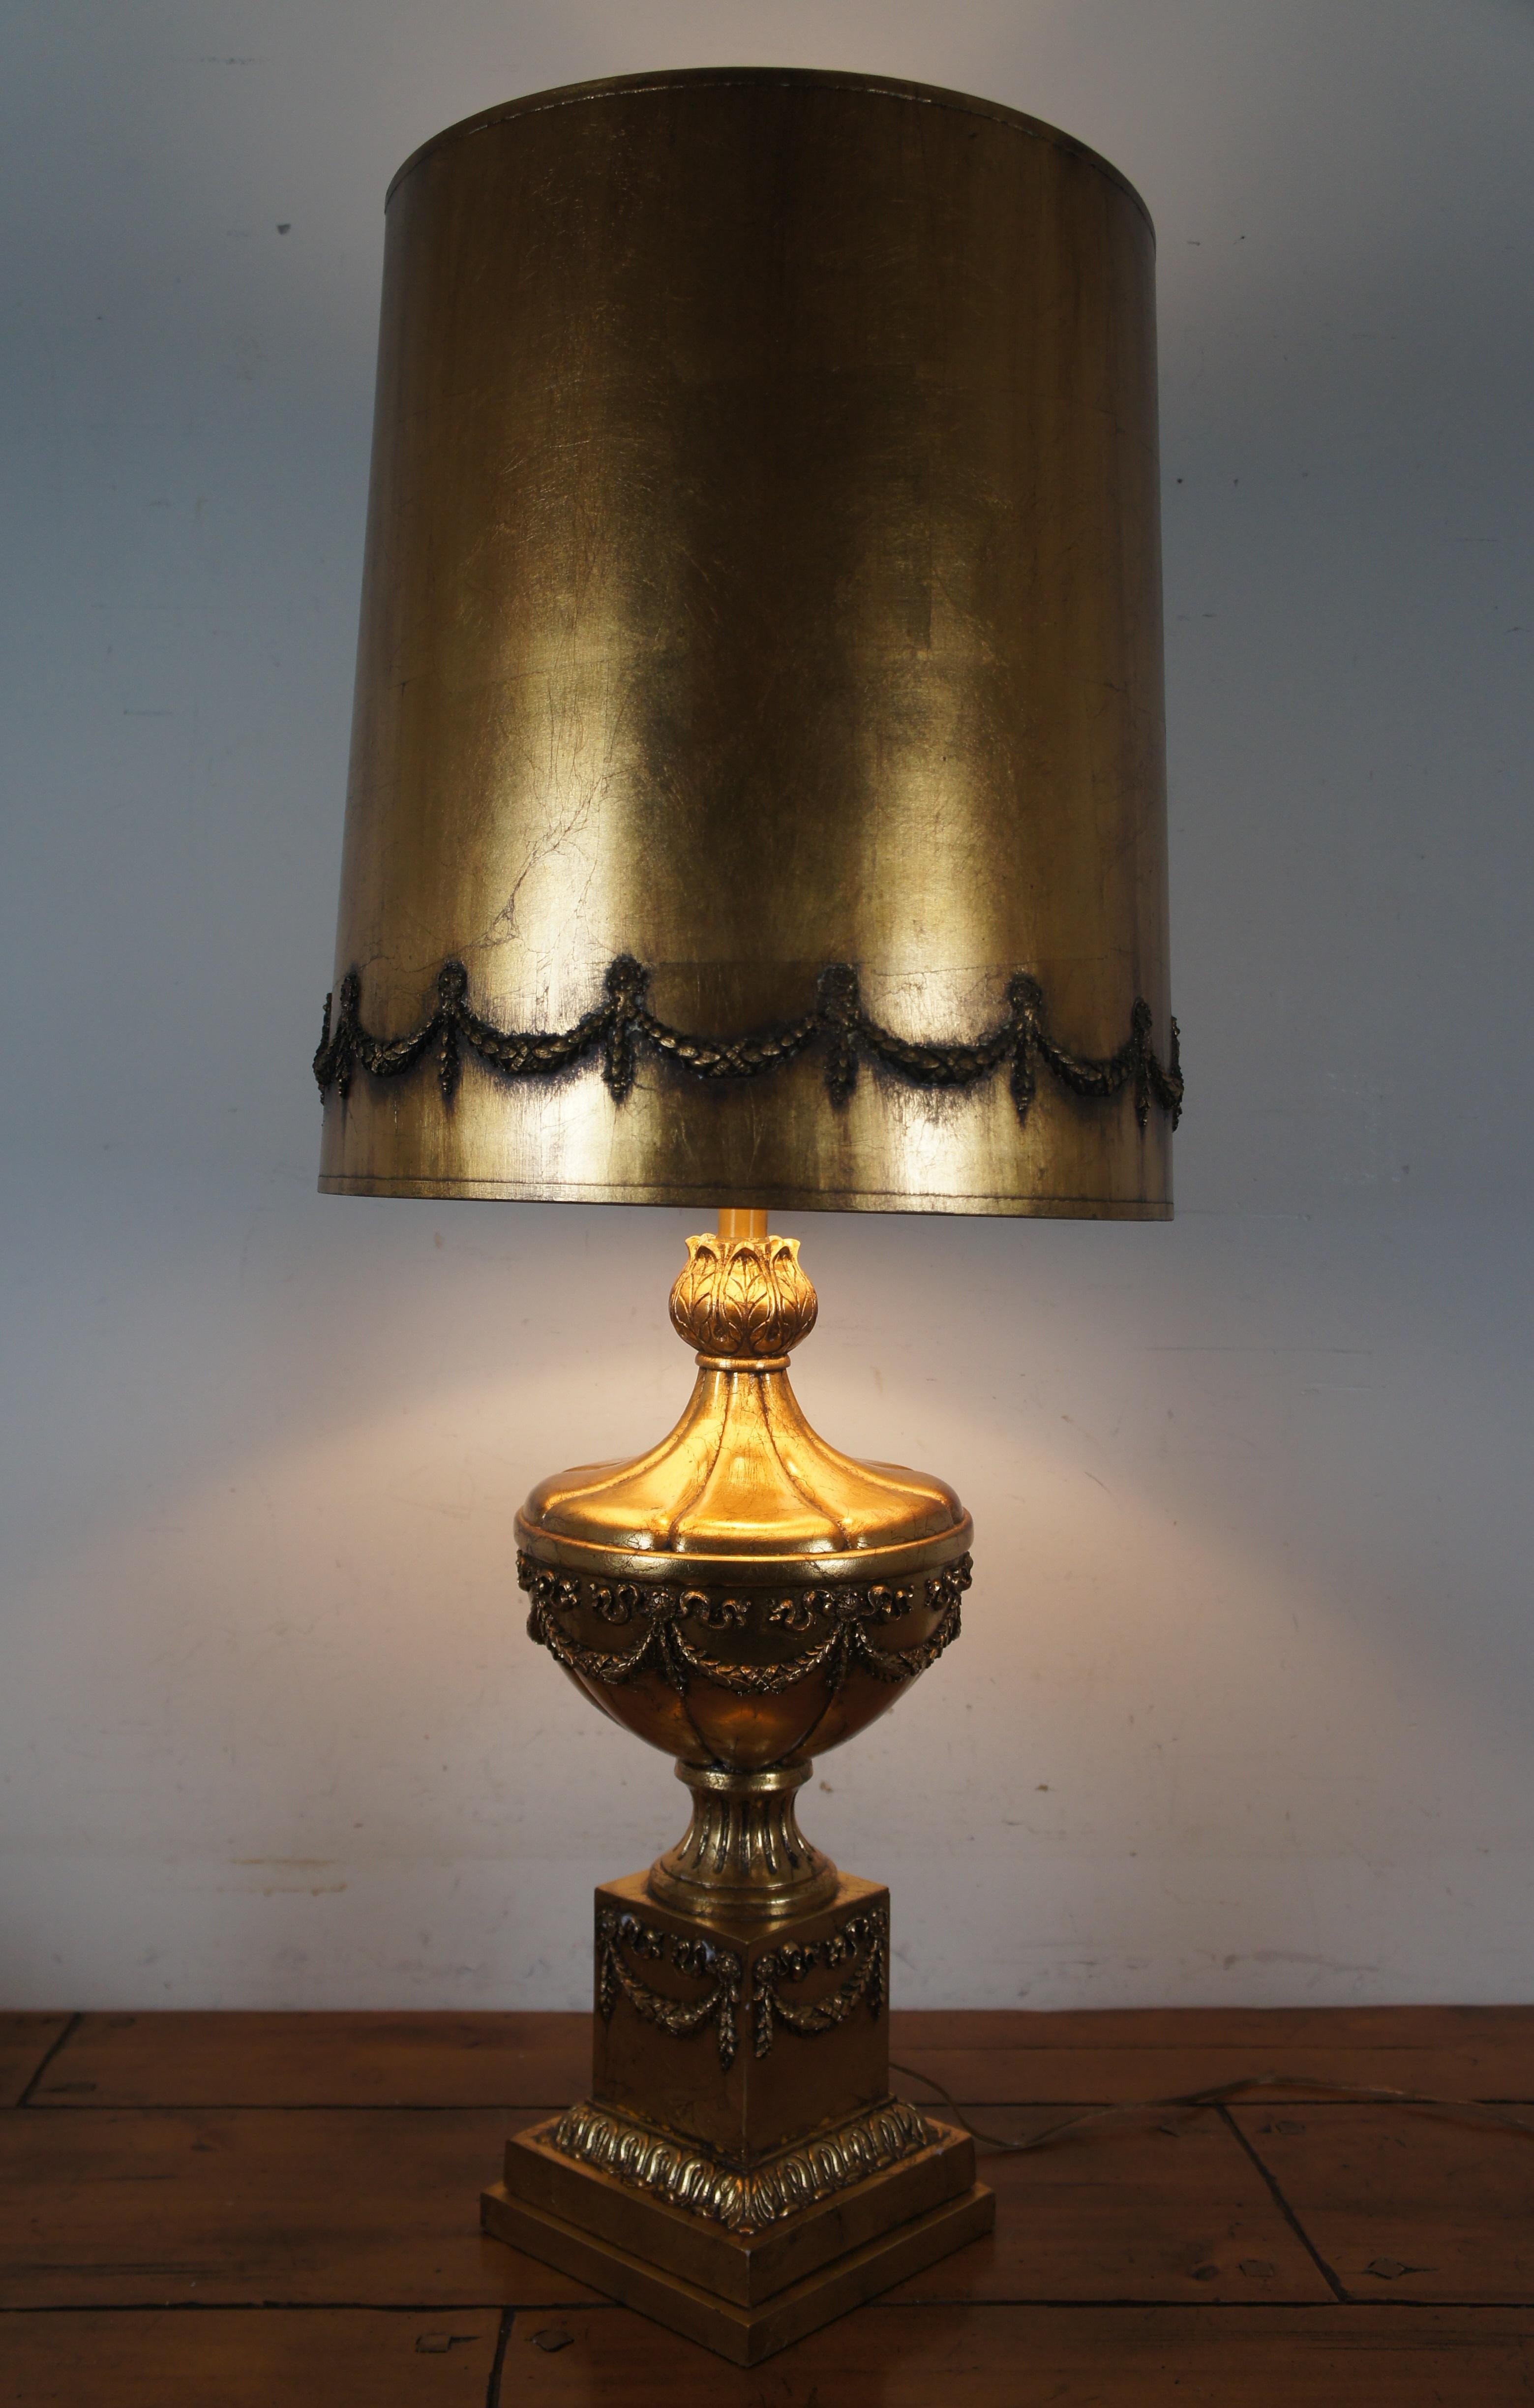 20th Century Mid-century Neoclassical Hollywood Regency Faip Gold Trophy Urn Lamp 40